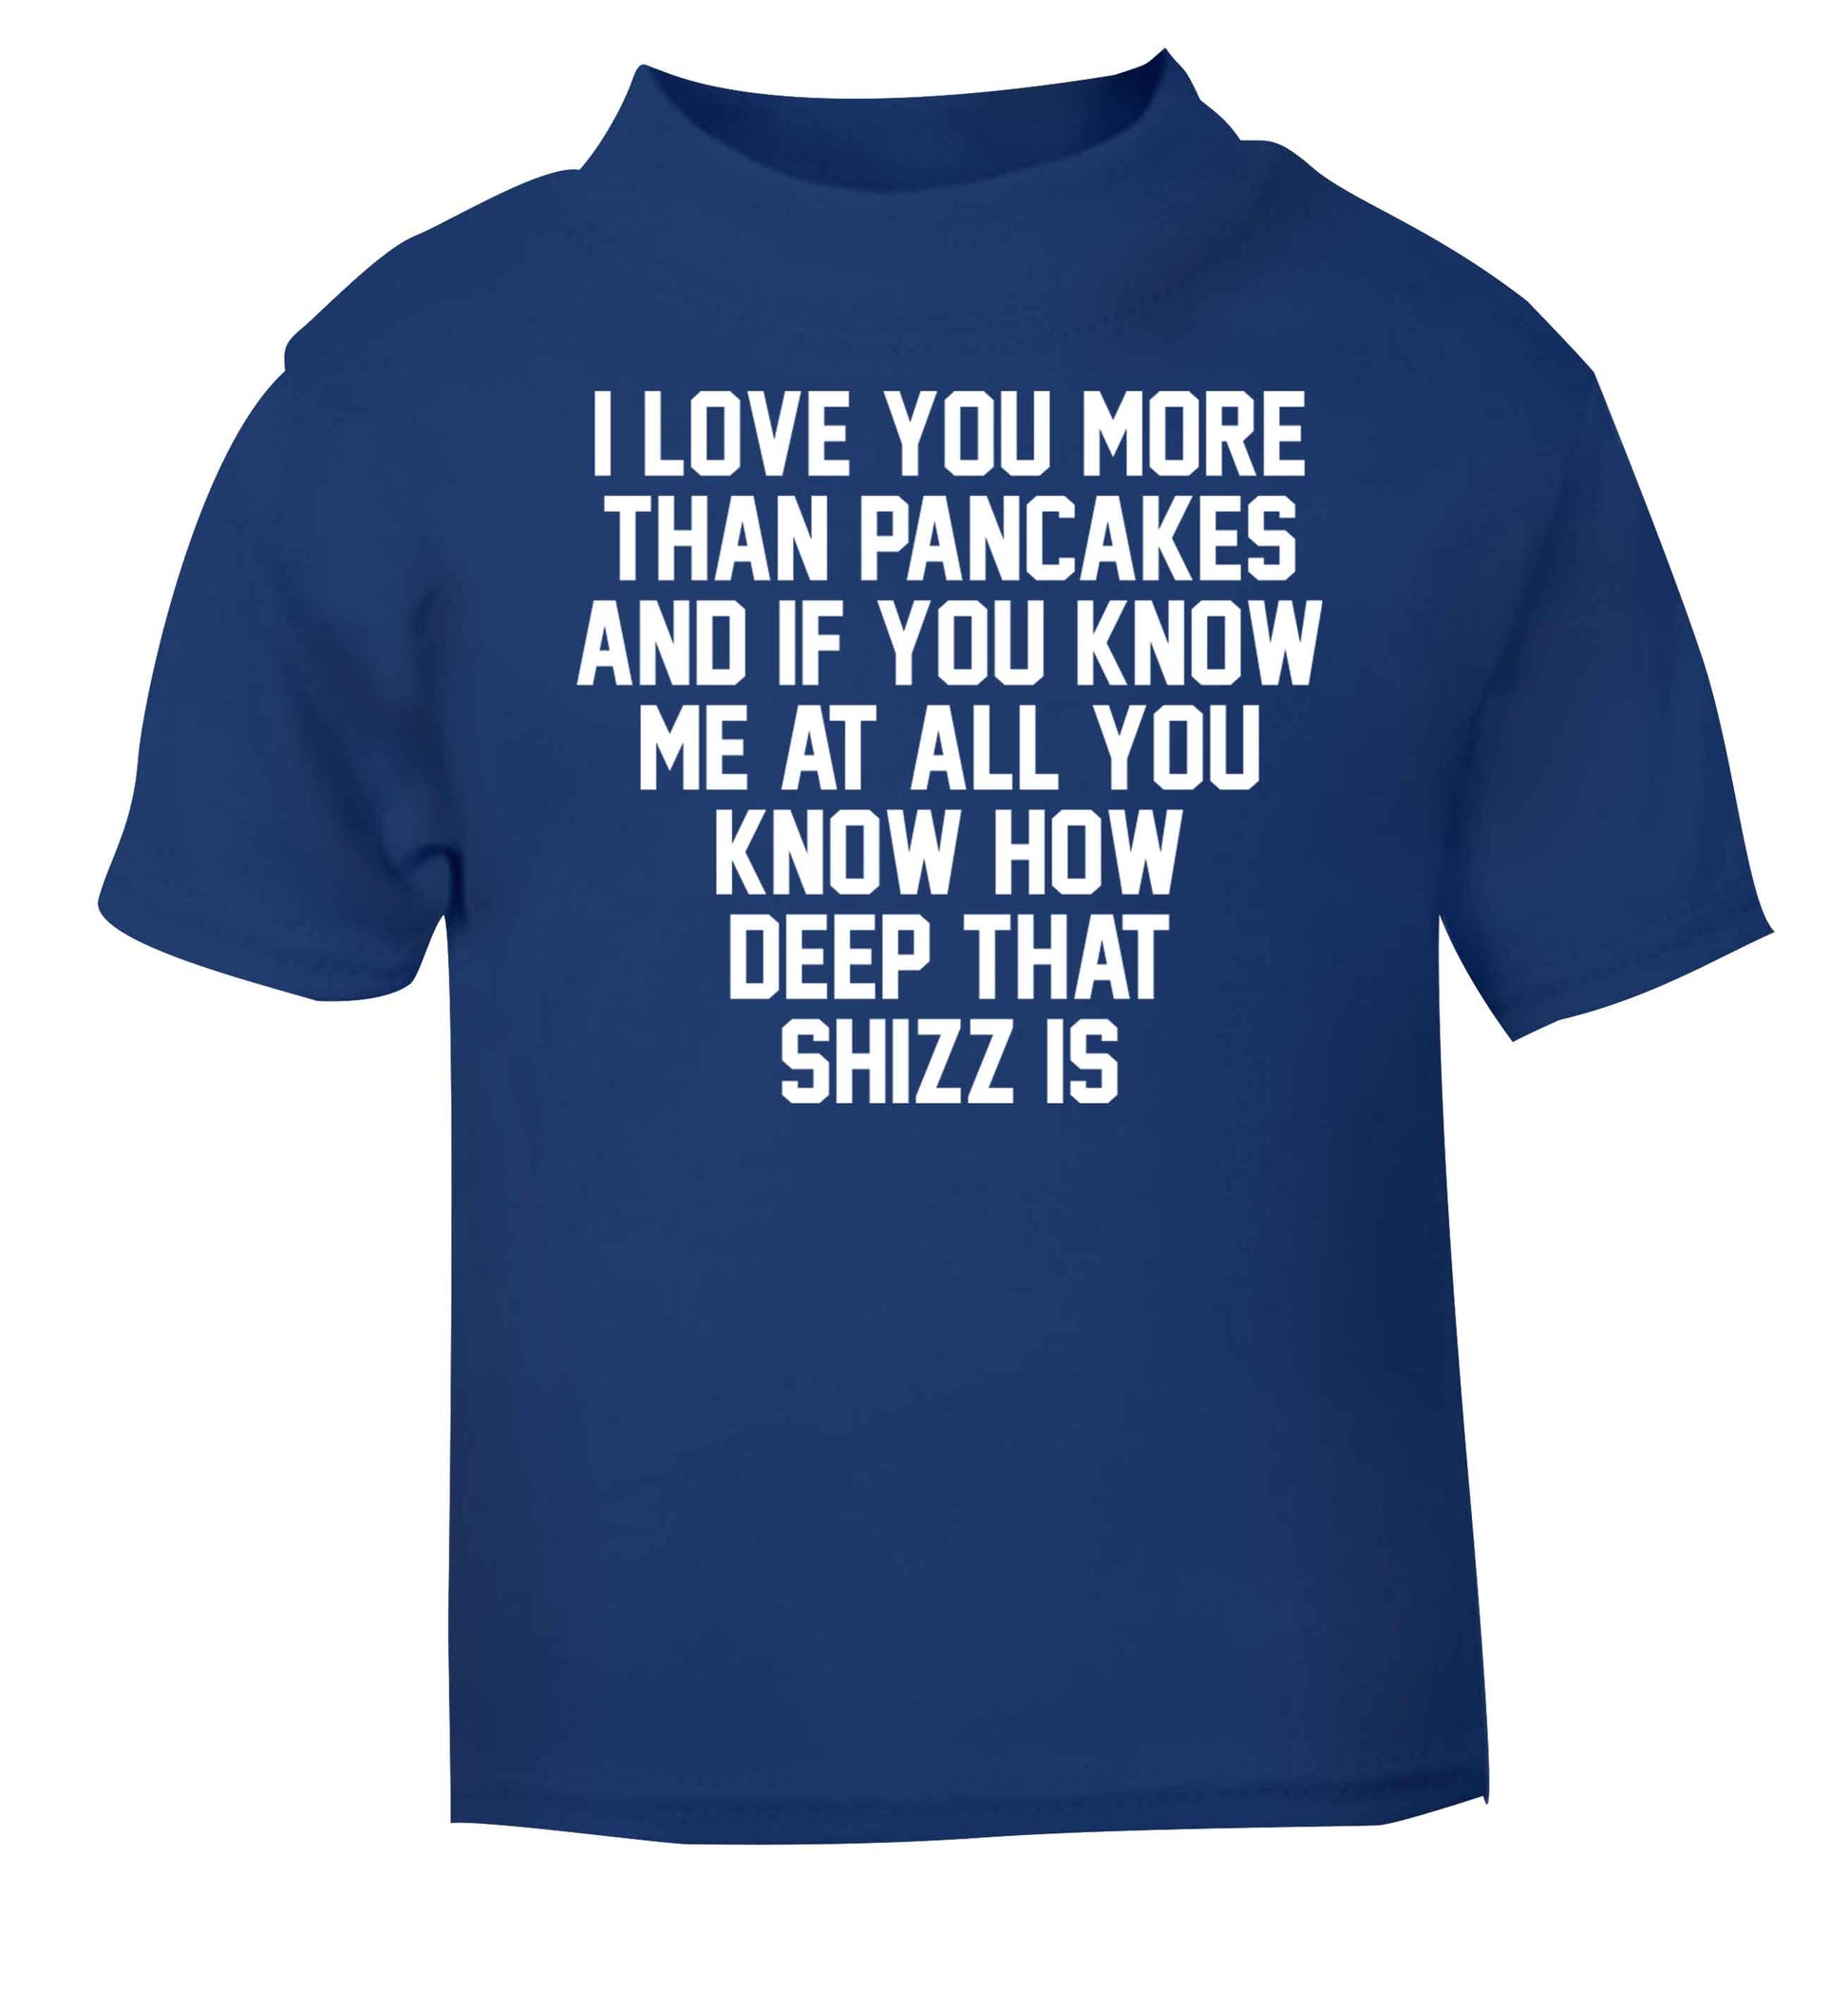 I love you more than pancakes and if you know me at all you know how deep that shizz is blue baby toddler Tshirt 2 Years